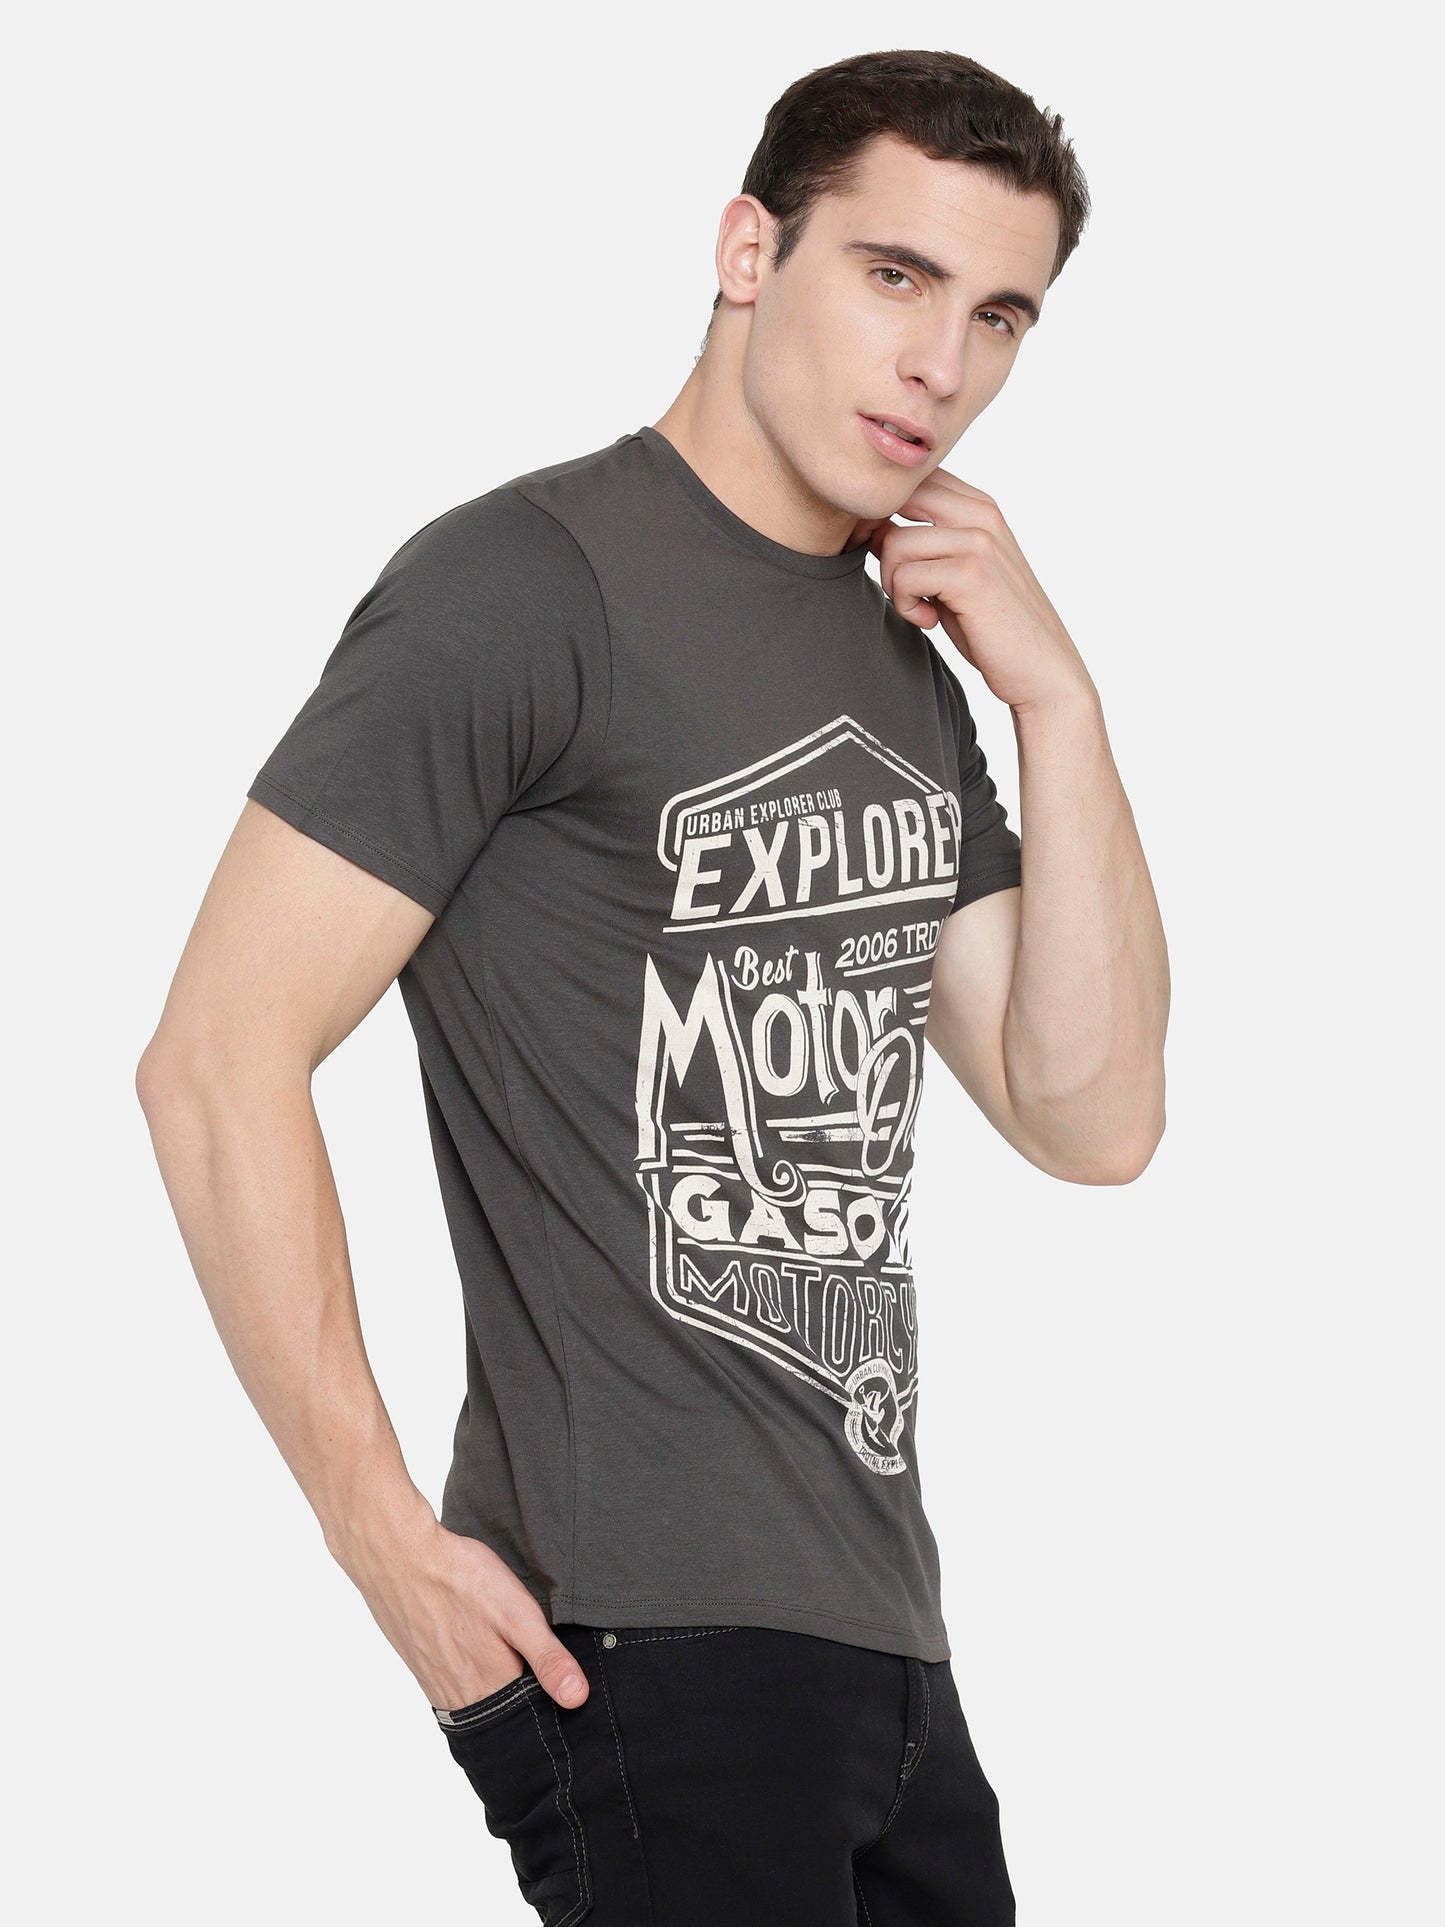 Charcoal Grey Chest Printed T-Shirt